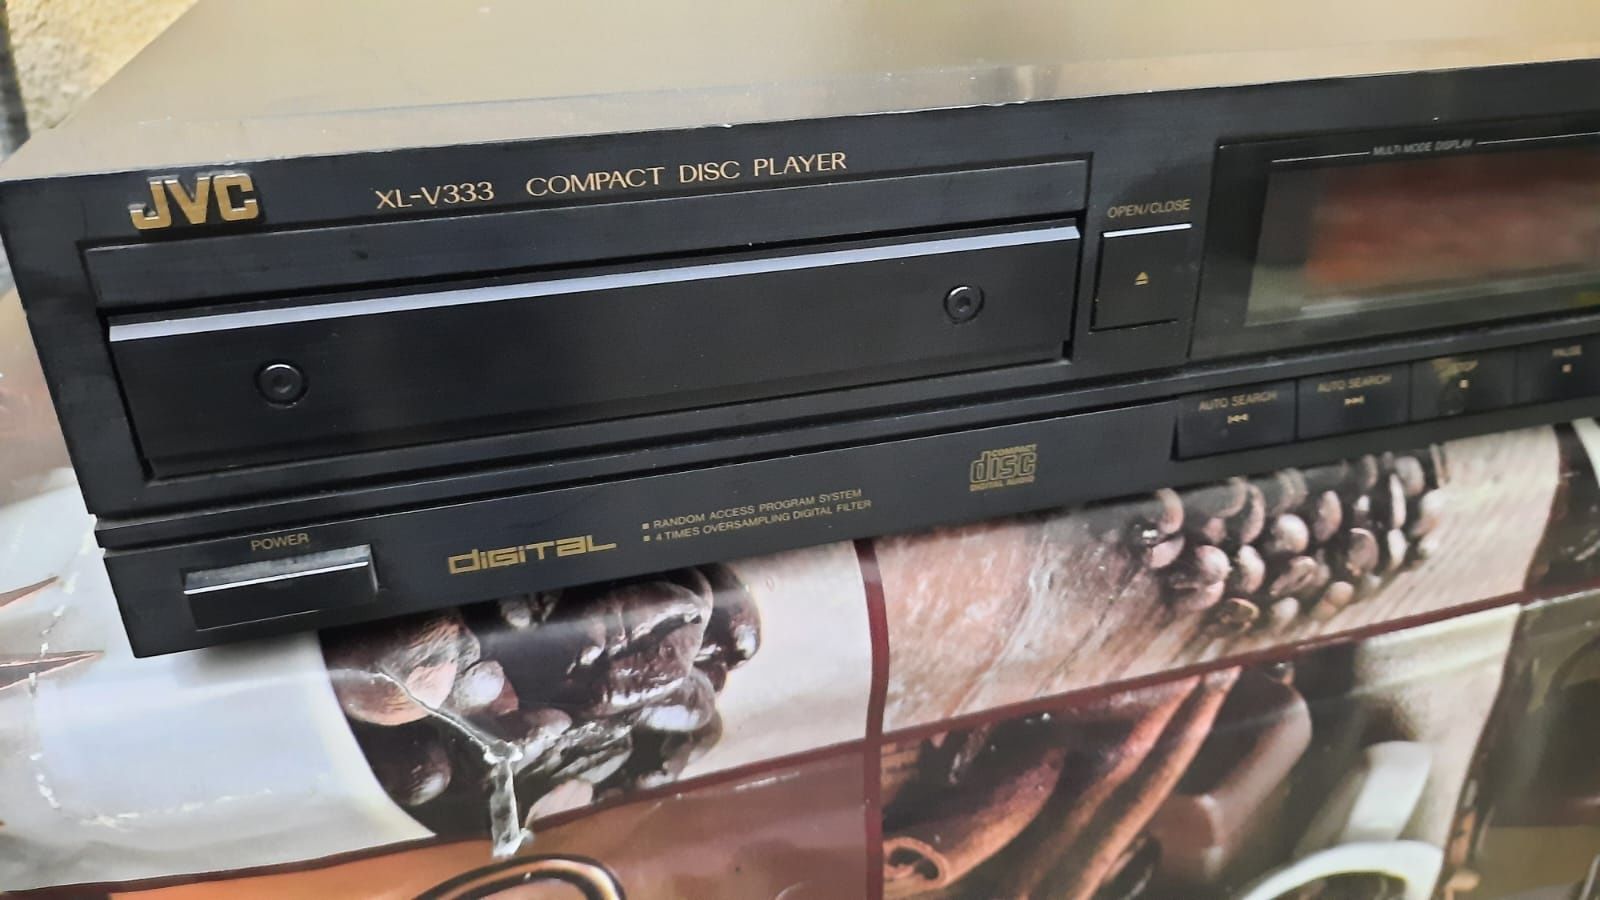 Jvc compact disc player made in japan